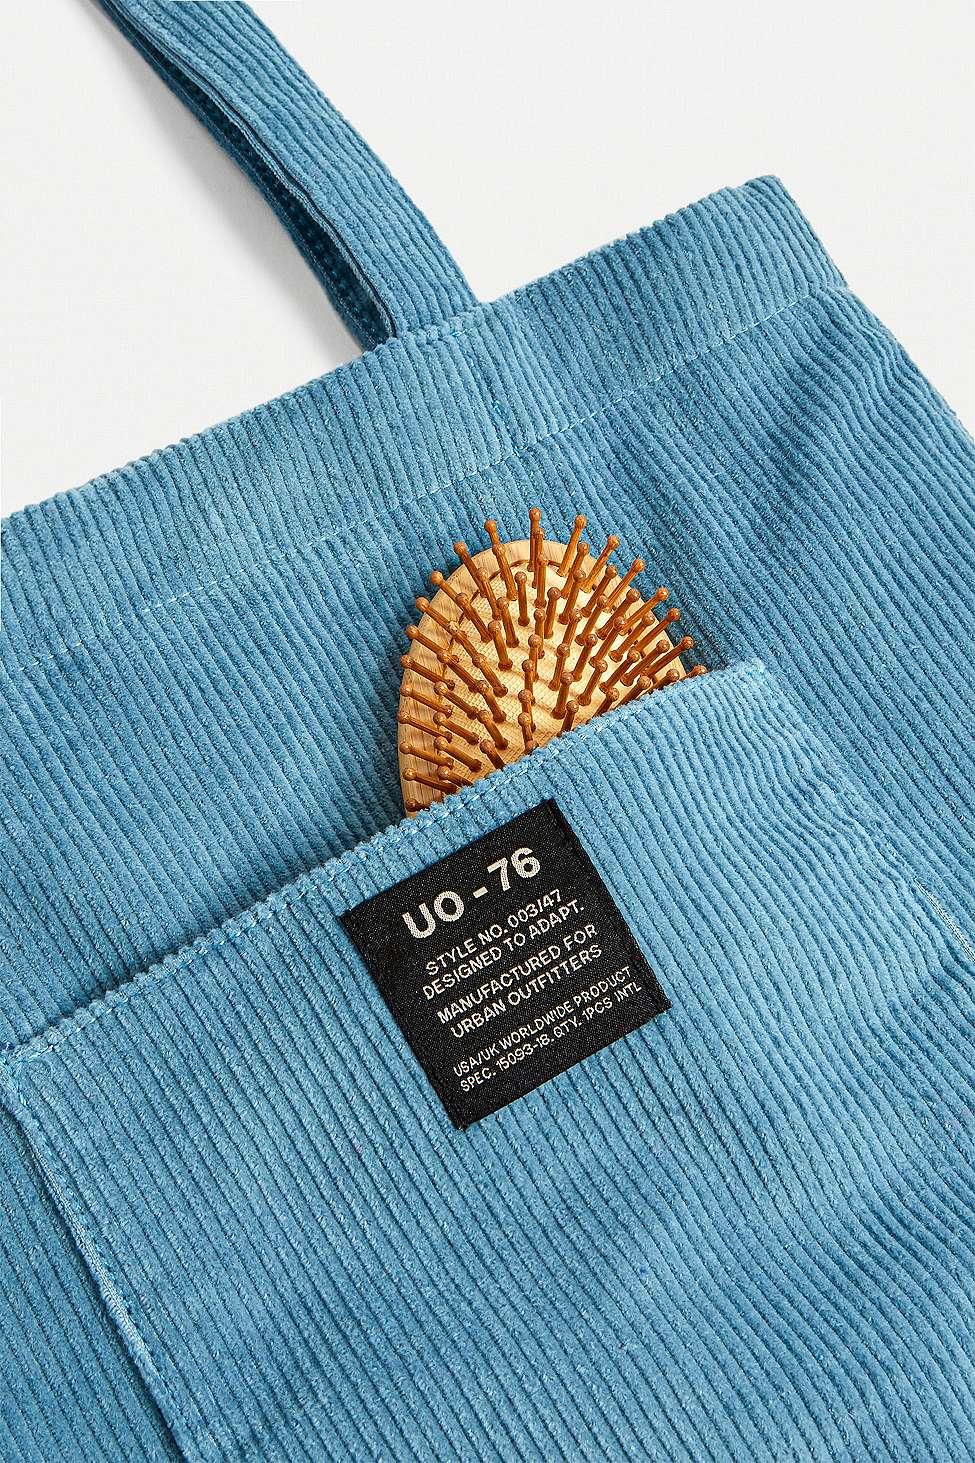 Urban Outfitters Uo Corduroy Pocket Tote Bag in Green